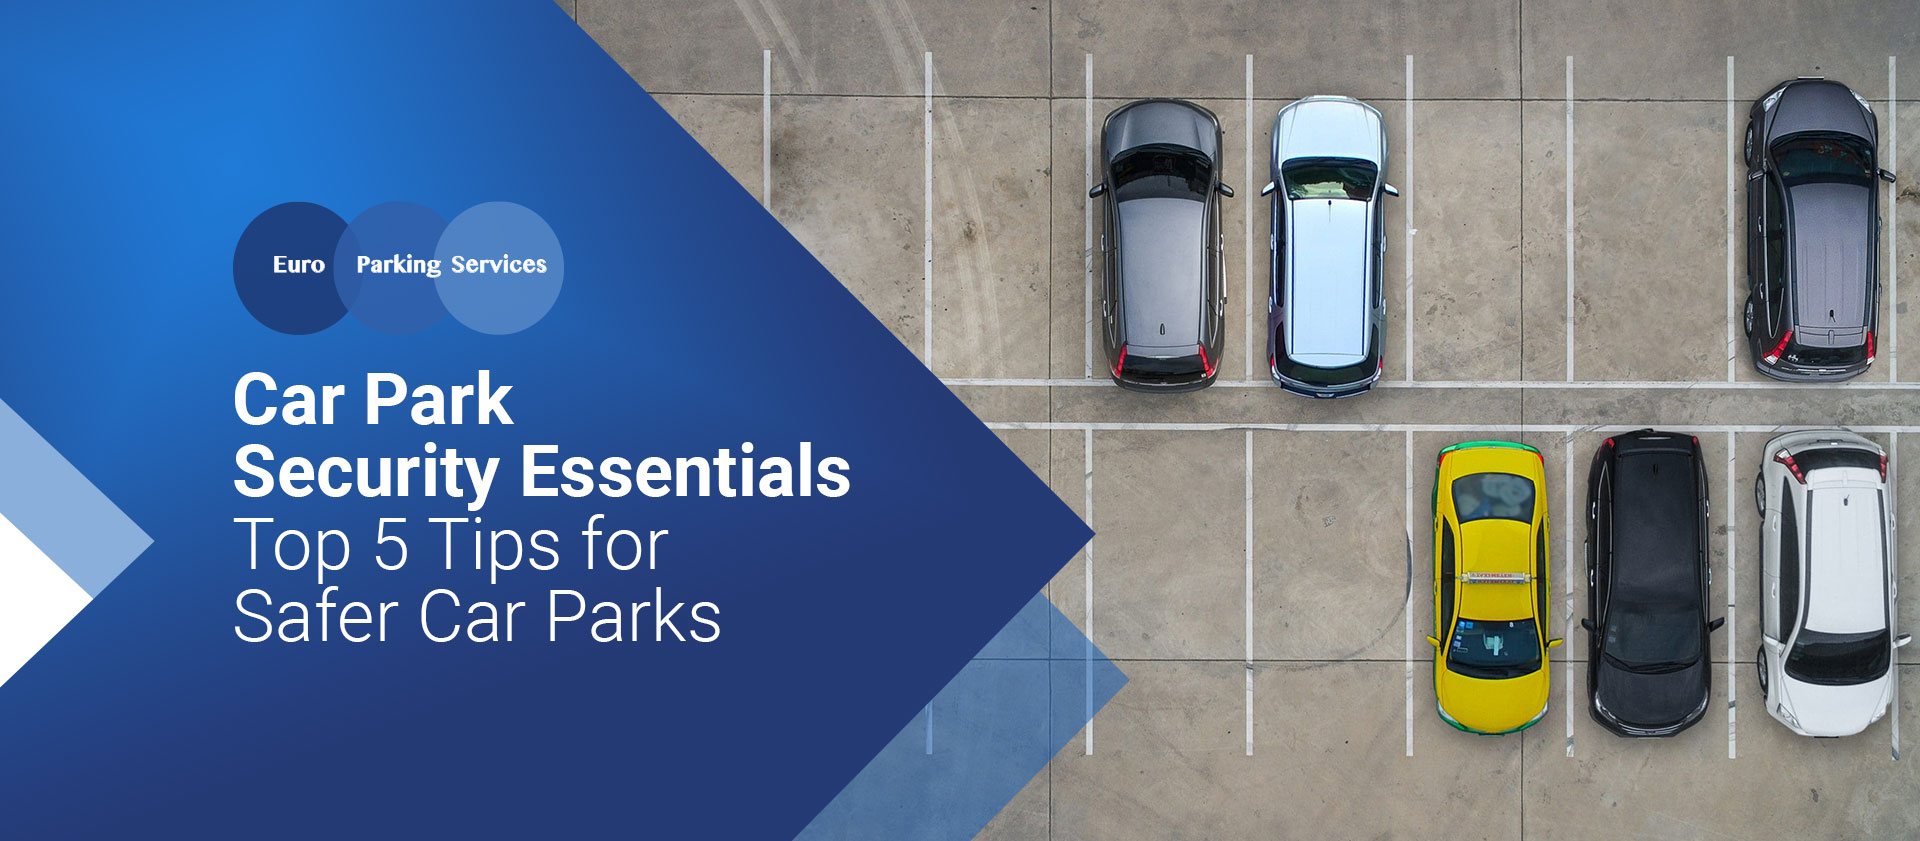 Car Park Security Essentials Top 5 Tips for Safer Car Parks Euro Parking Services | Euro Parking Services